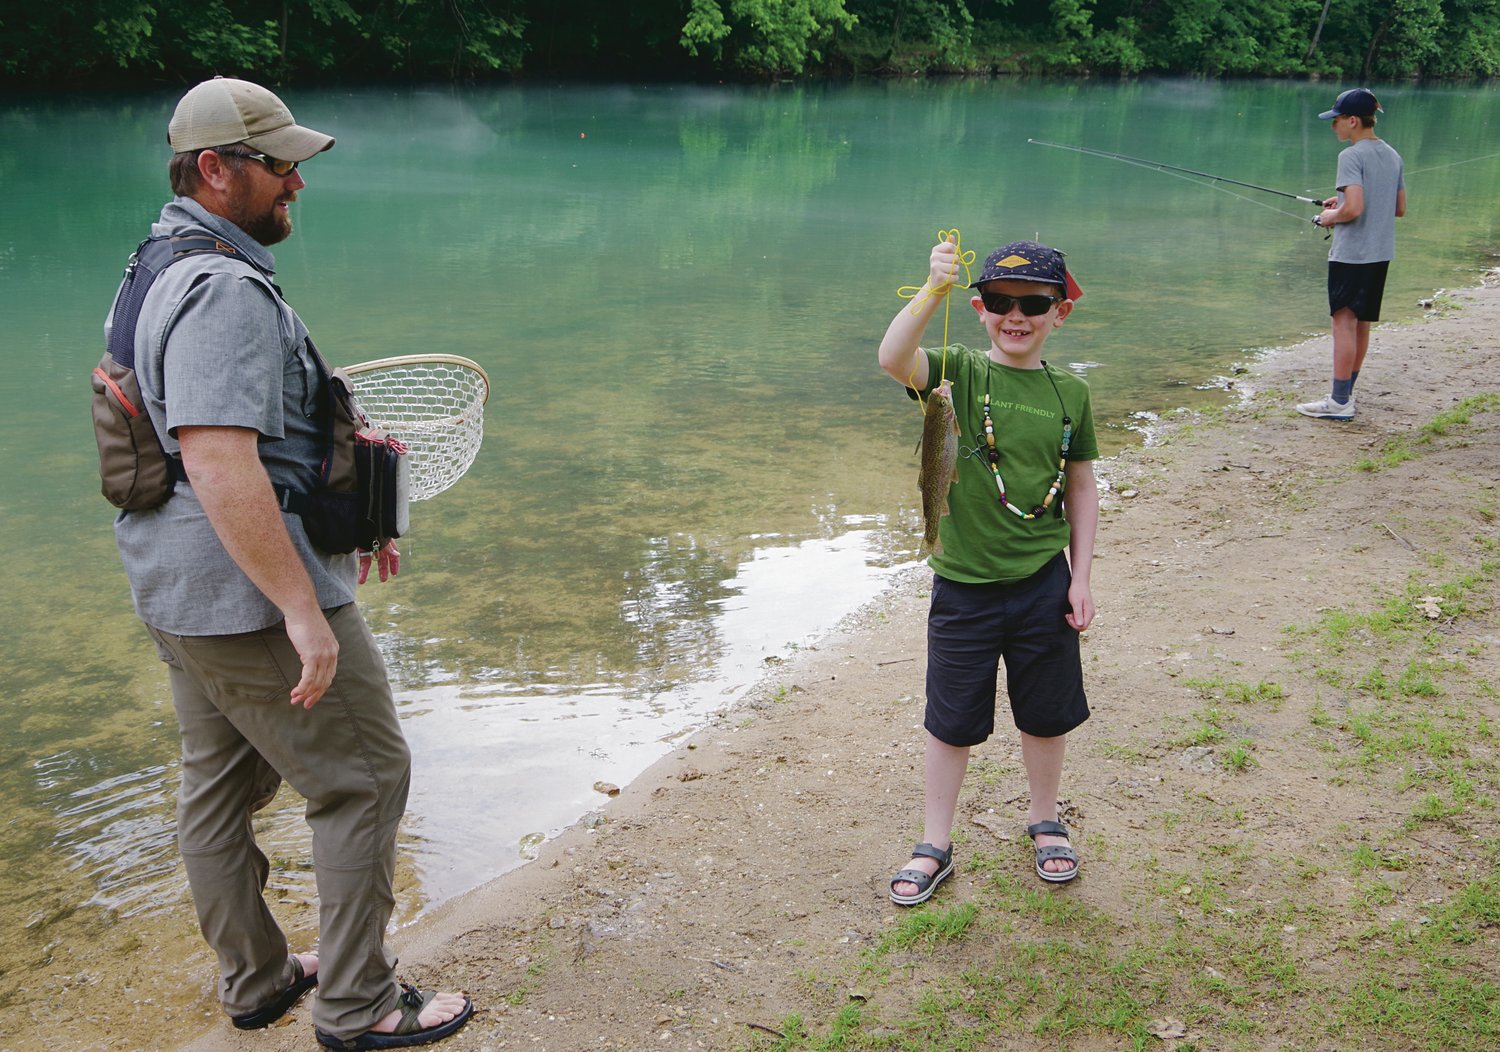 Between helping student detangle their lines and tie on different lures, Ryne Emerick, LHS science teacher and co-teacher of Explorer Camp at Bennett, gave his son, Edward, 8, some trout catching family secrets. Edward landed two very quickly by fishing in the shallow water.